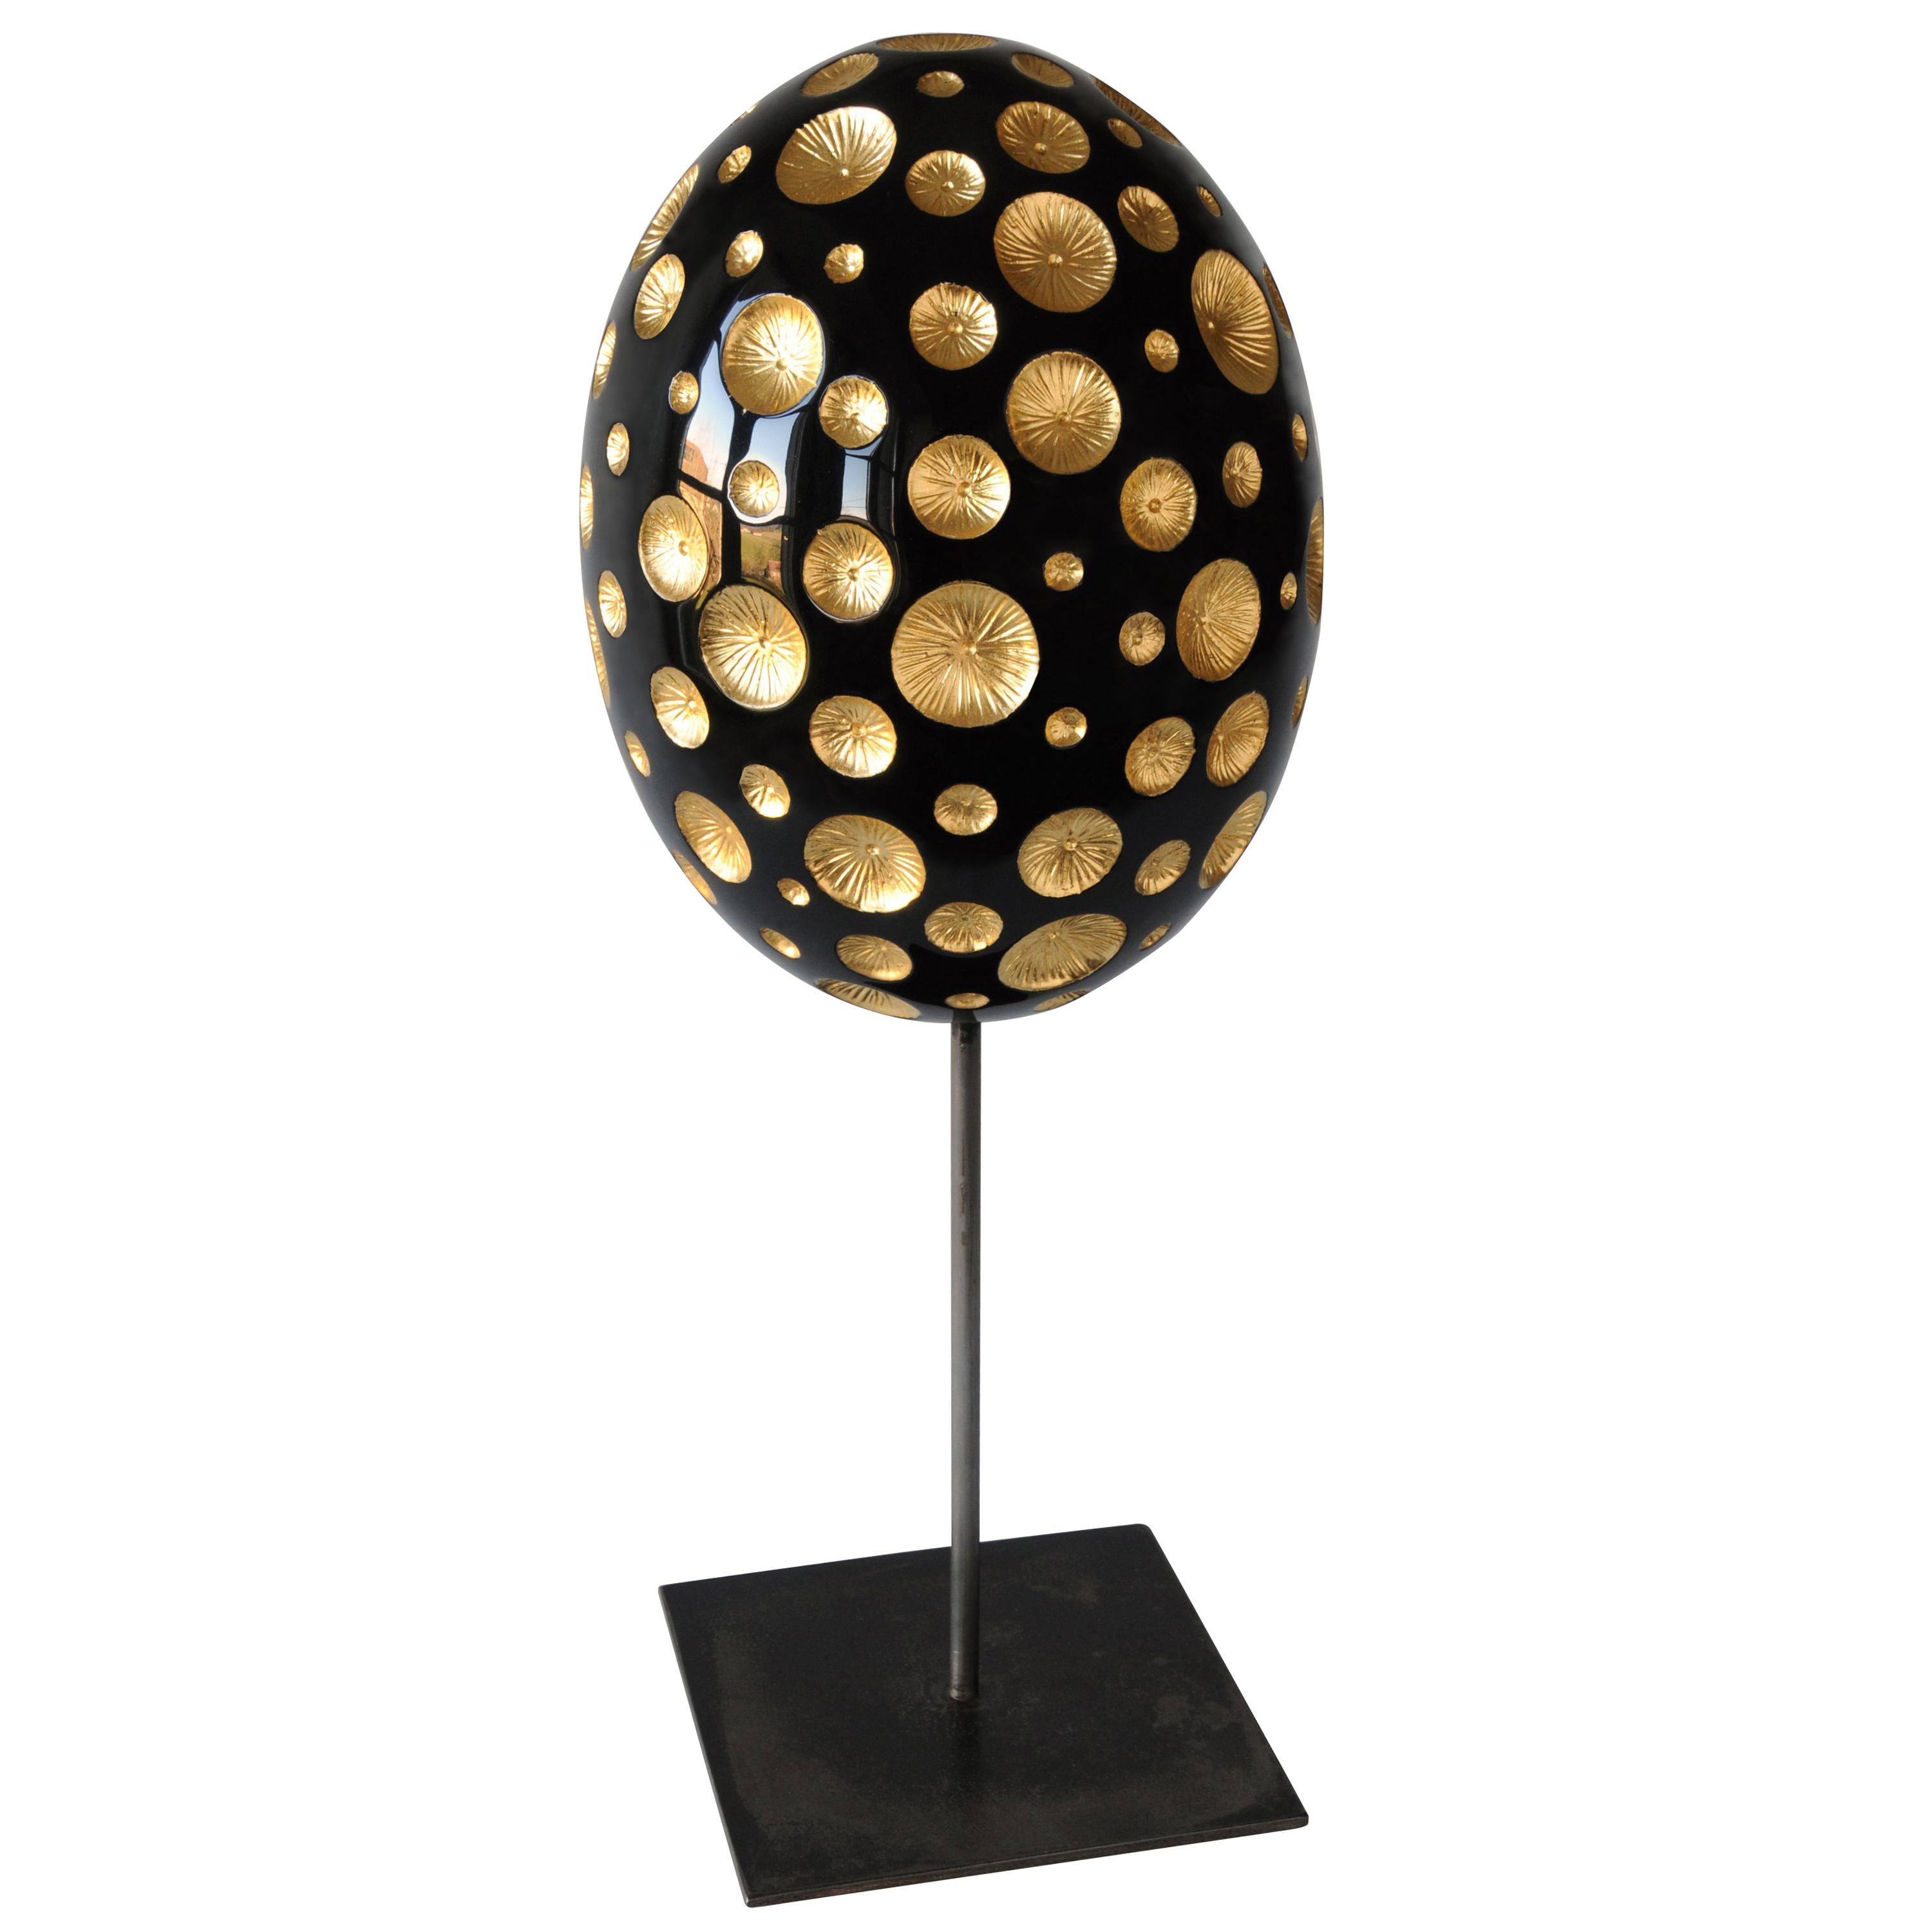 Lacquered Wood and Gold Sculpture, Fireworks